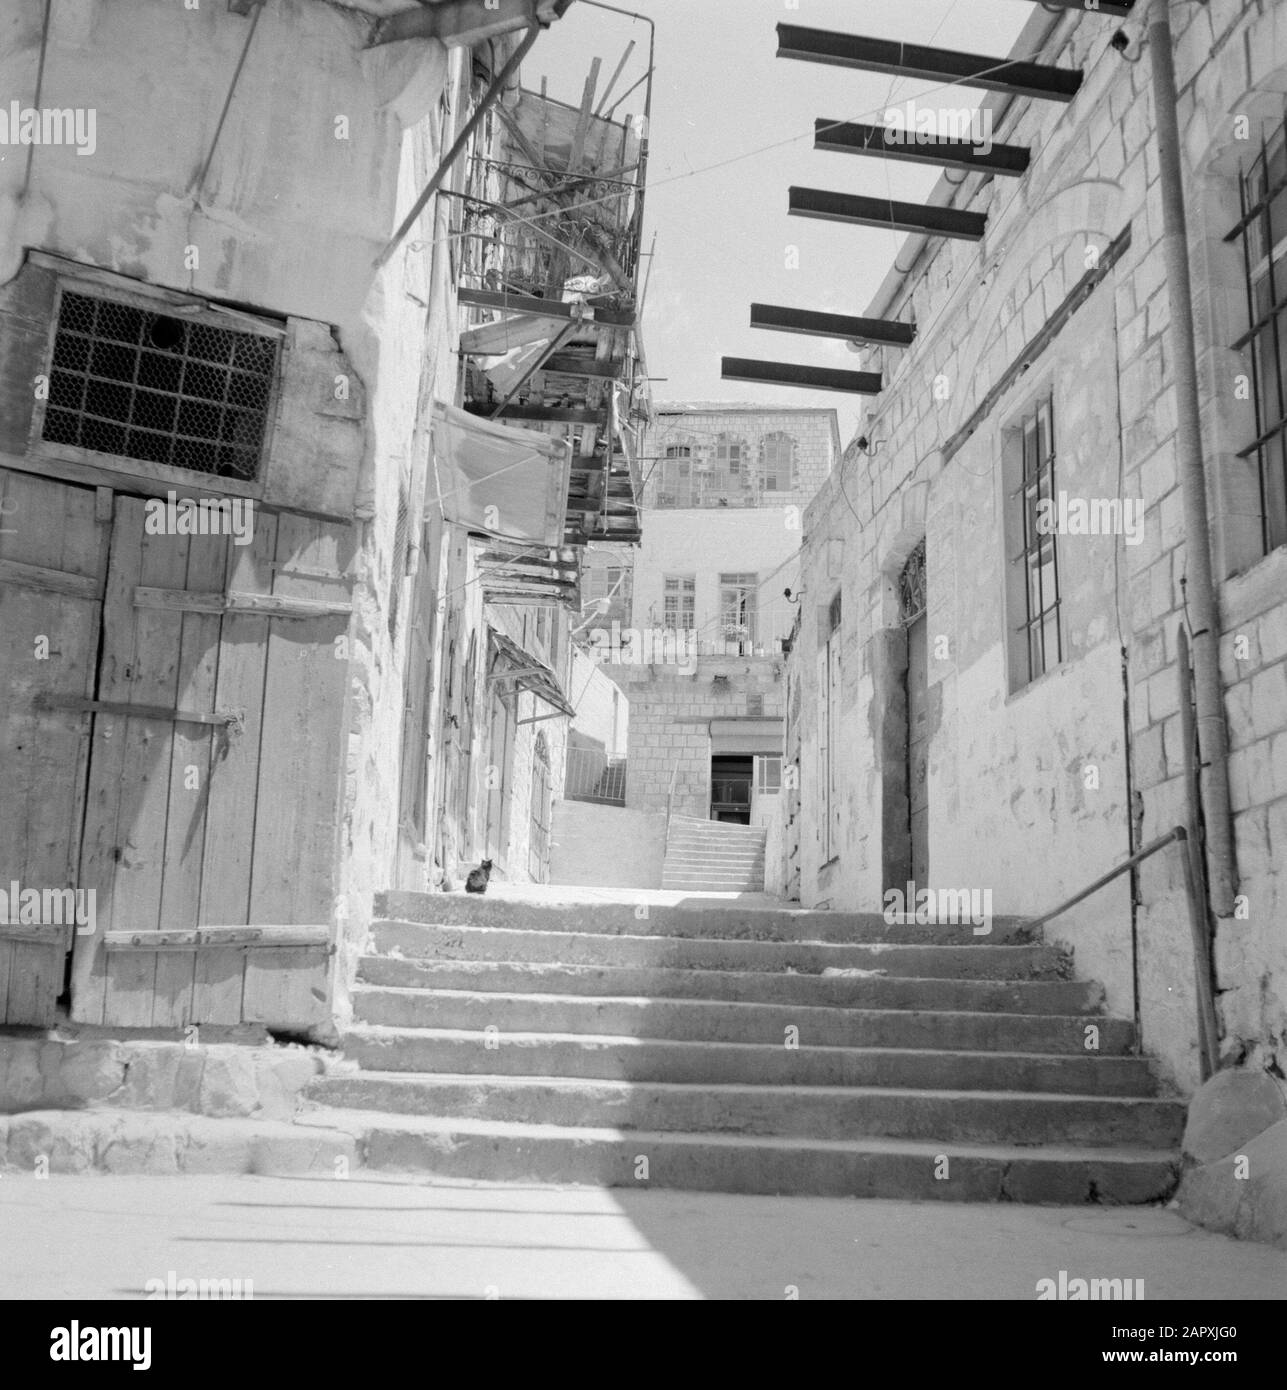 Street image in the artists' colony near Safad (Safed). Houses with wrought-iron balconies and on the right a wall containing excellent iron supports for a balcony and with a staircase in front of the street and a gate with skylight and double door Date: undated Location: Israel, Safad, Safed Keywords: balconies, iron, artists' colonies, gates, street images, stairs Stock Photo